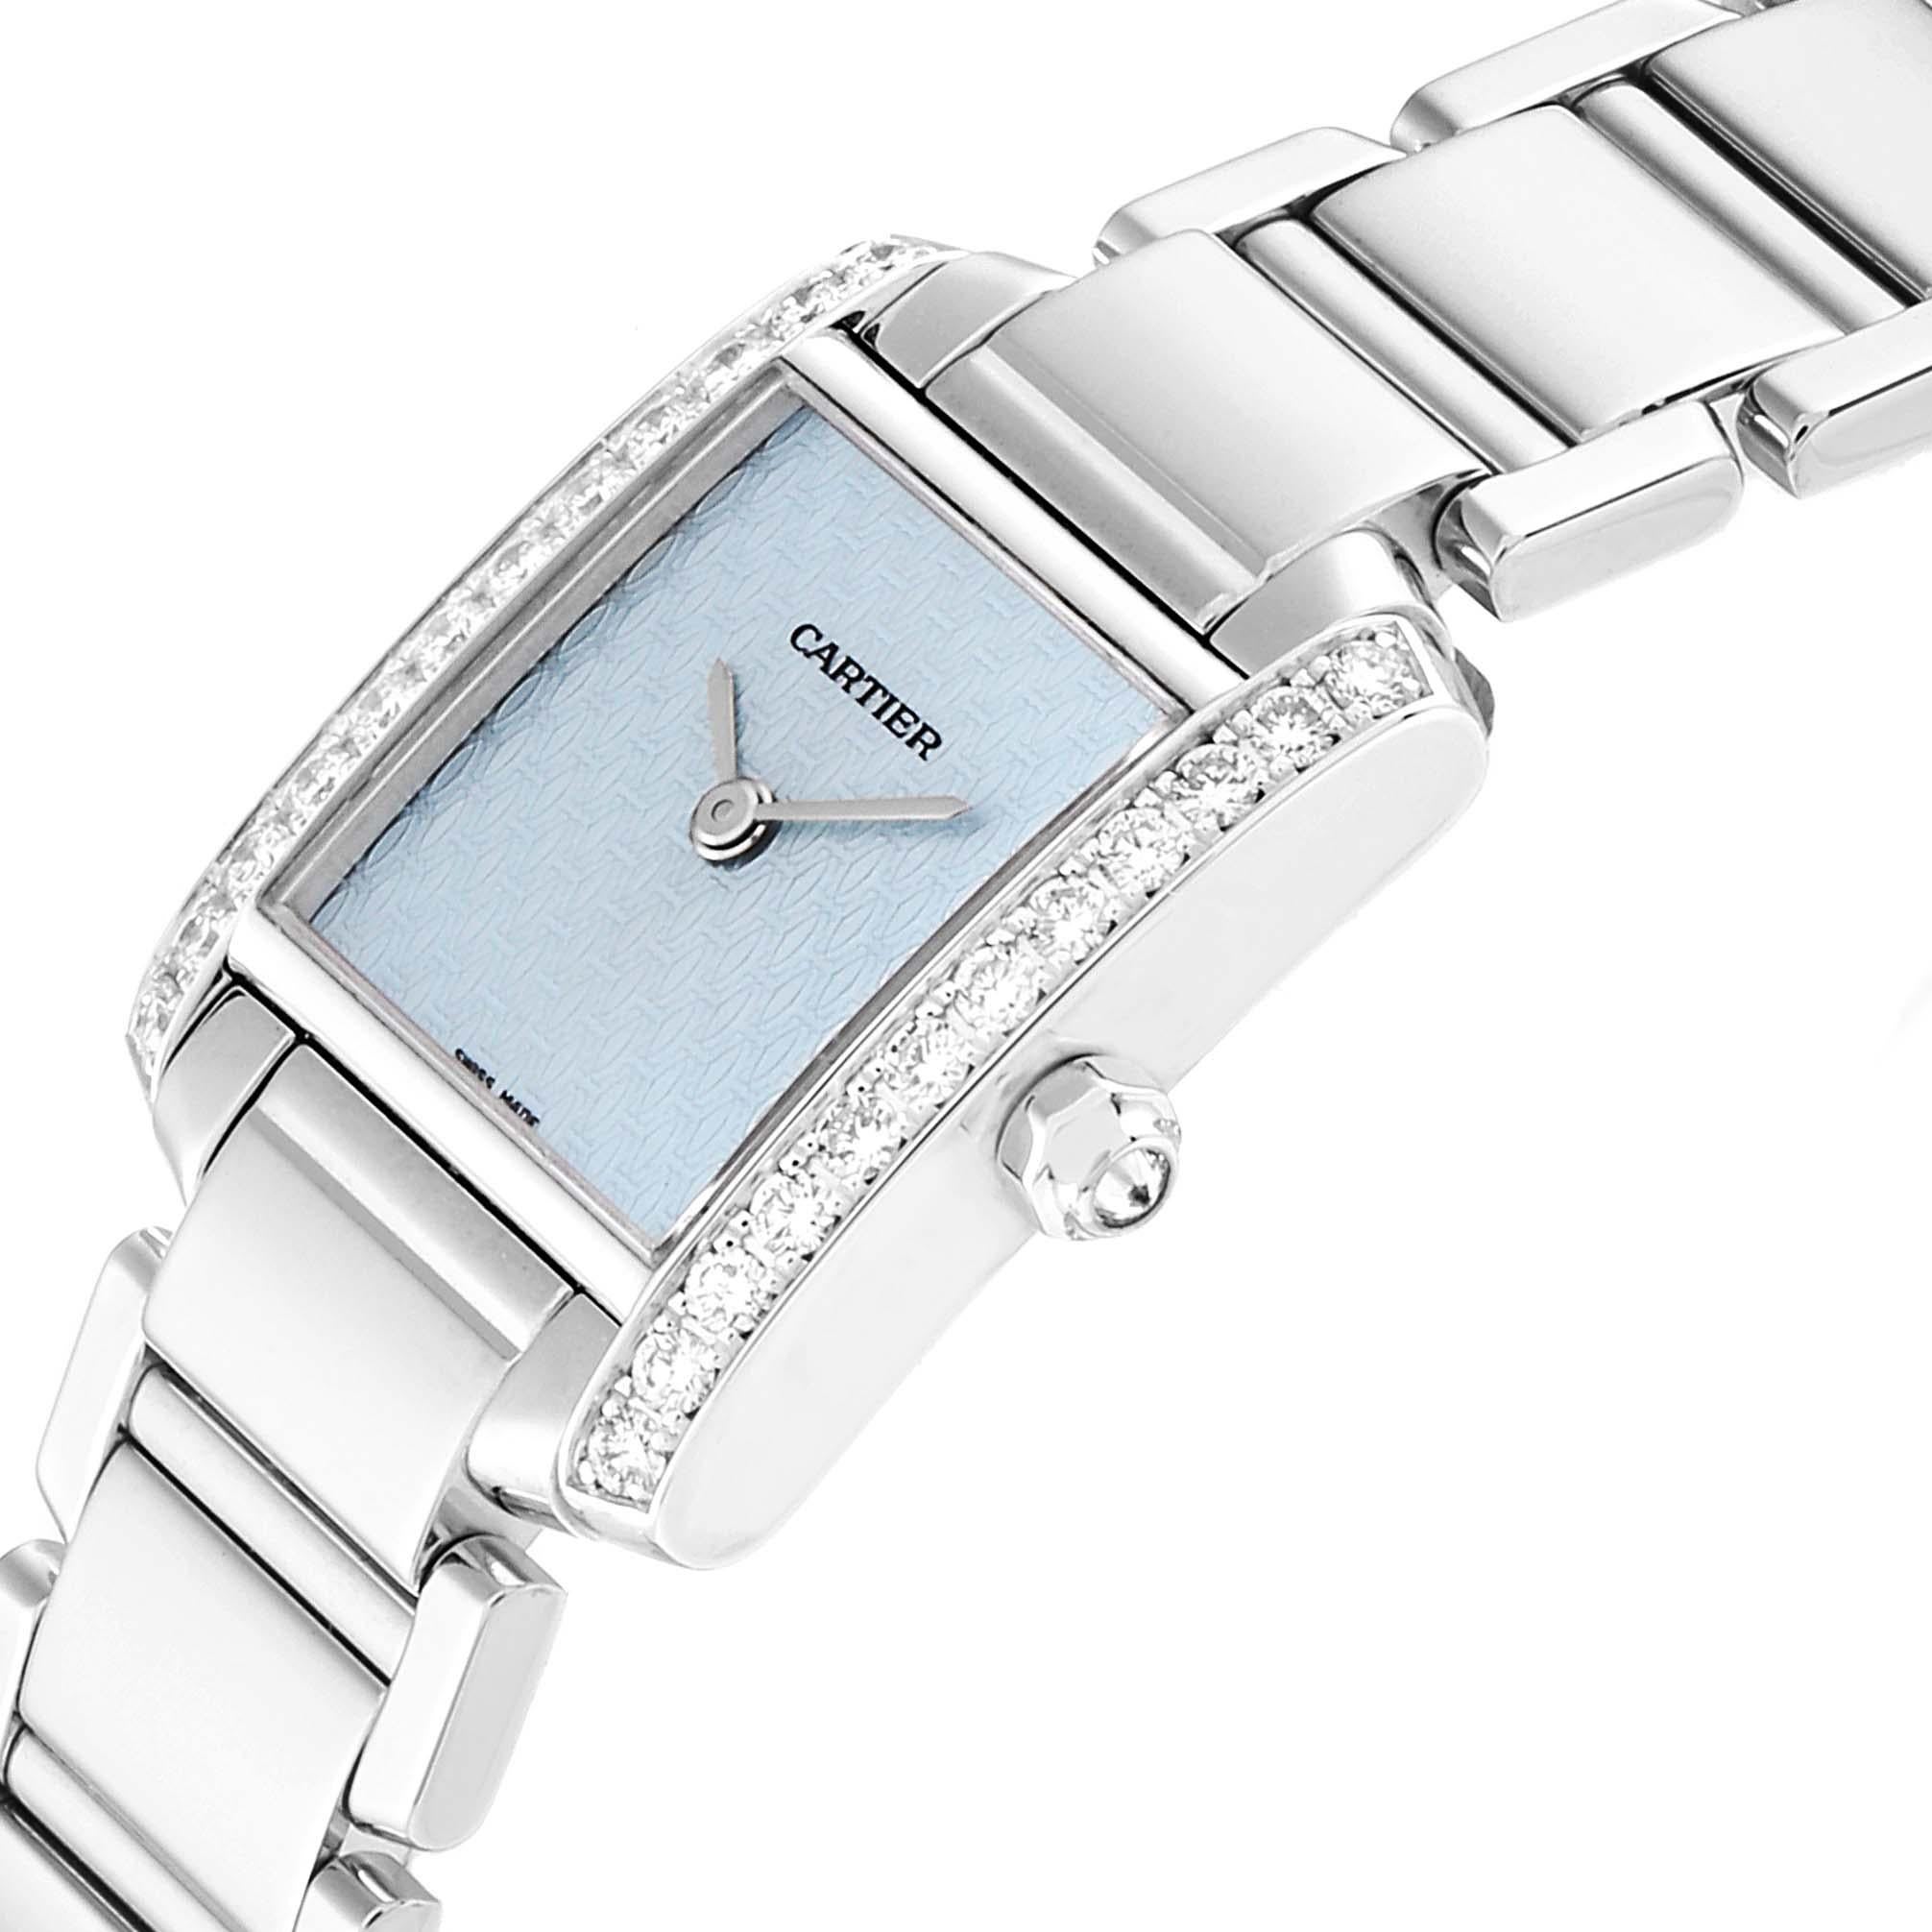 Cartier Tank Francaise White Gold Blue Dial Diamond Ladies Watch 2403 In Excellent Condition For Sale In Atlanta, GA